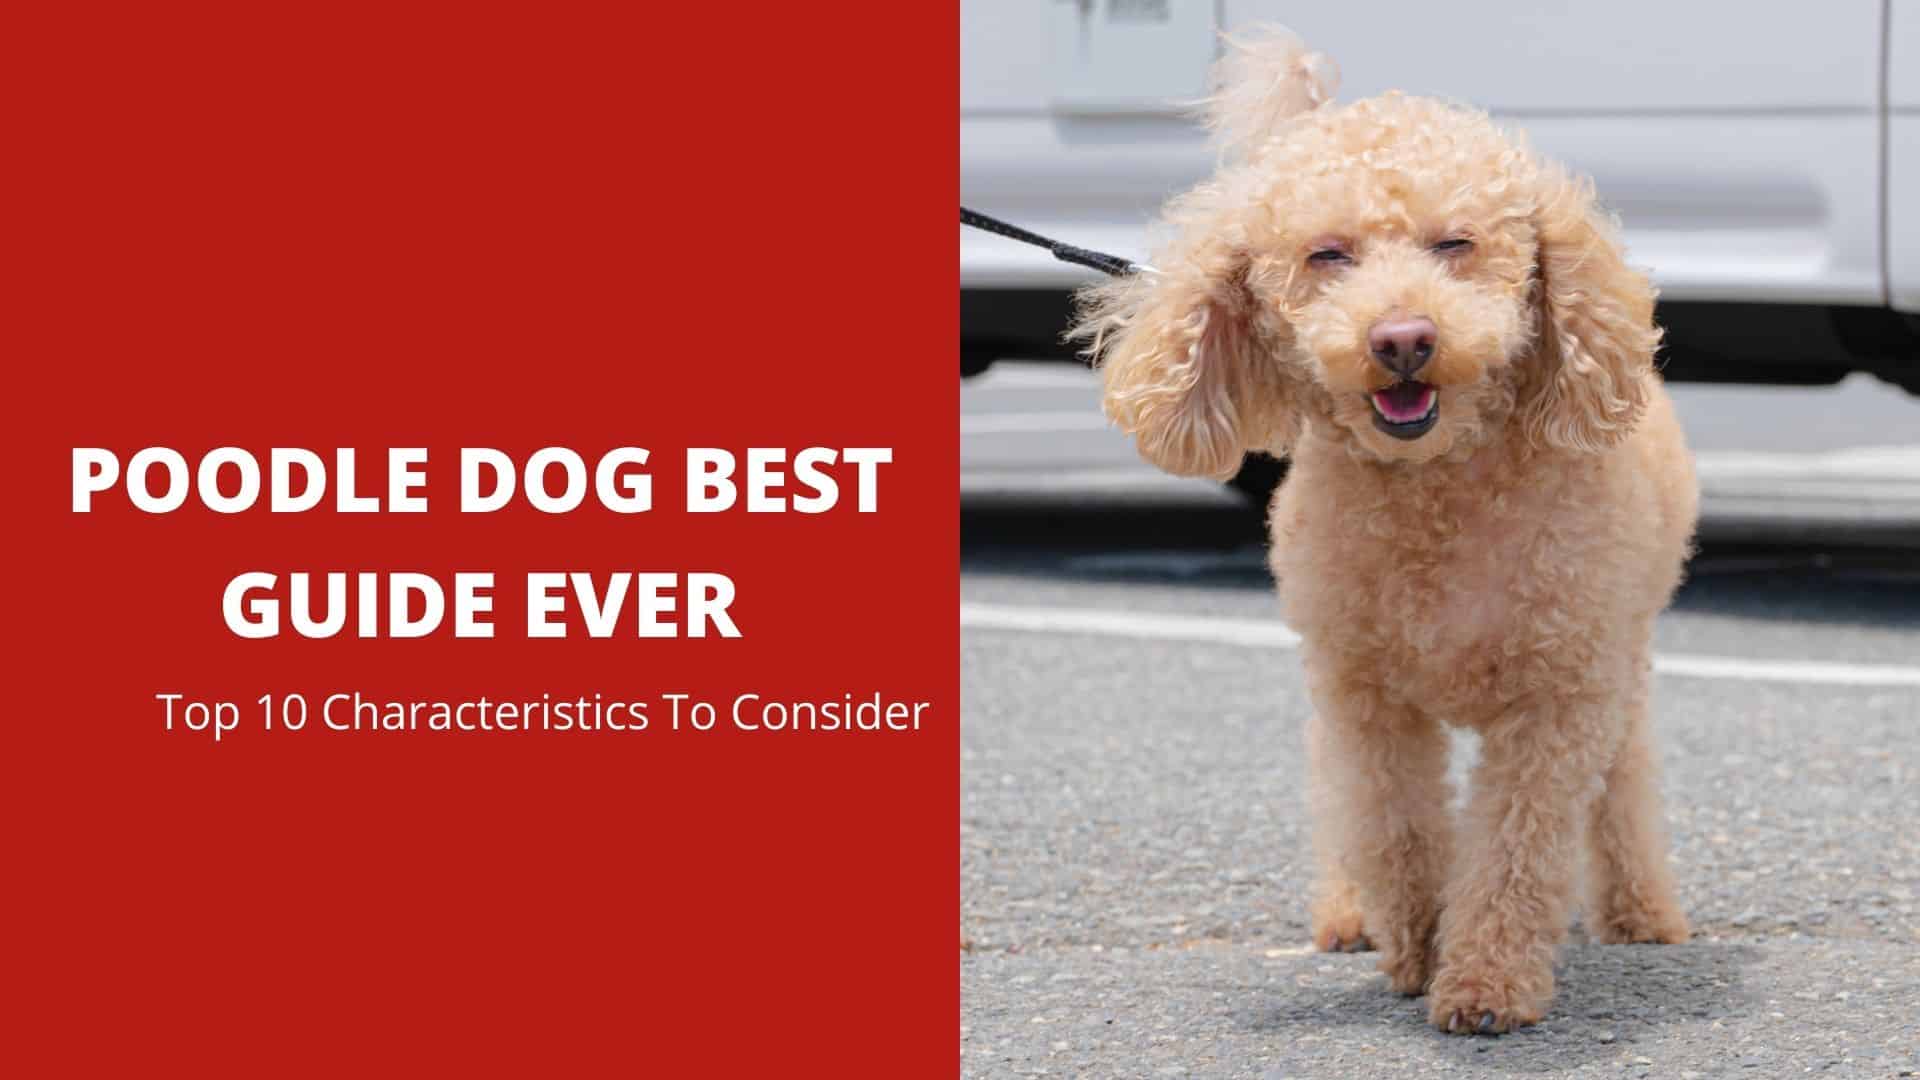 Poodle Dog Best Guide Ever – Top 10 Characteristics To Consider